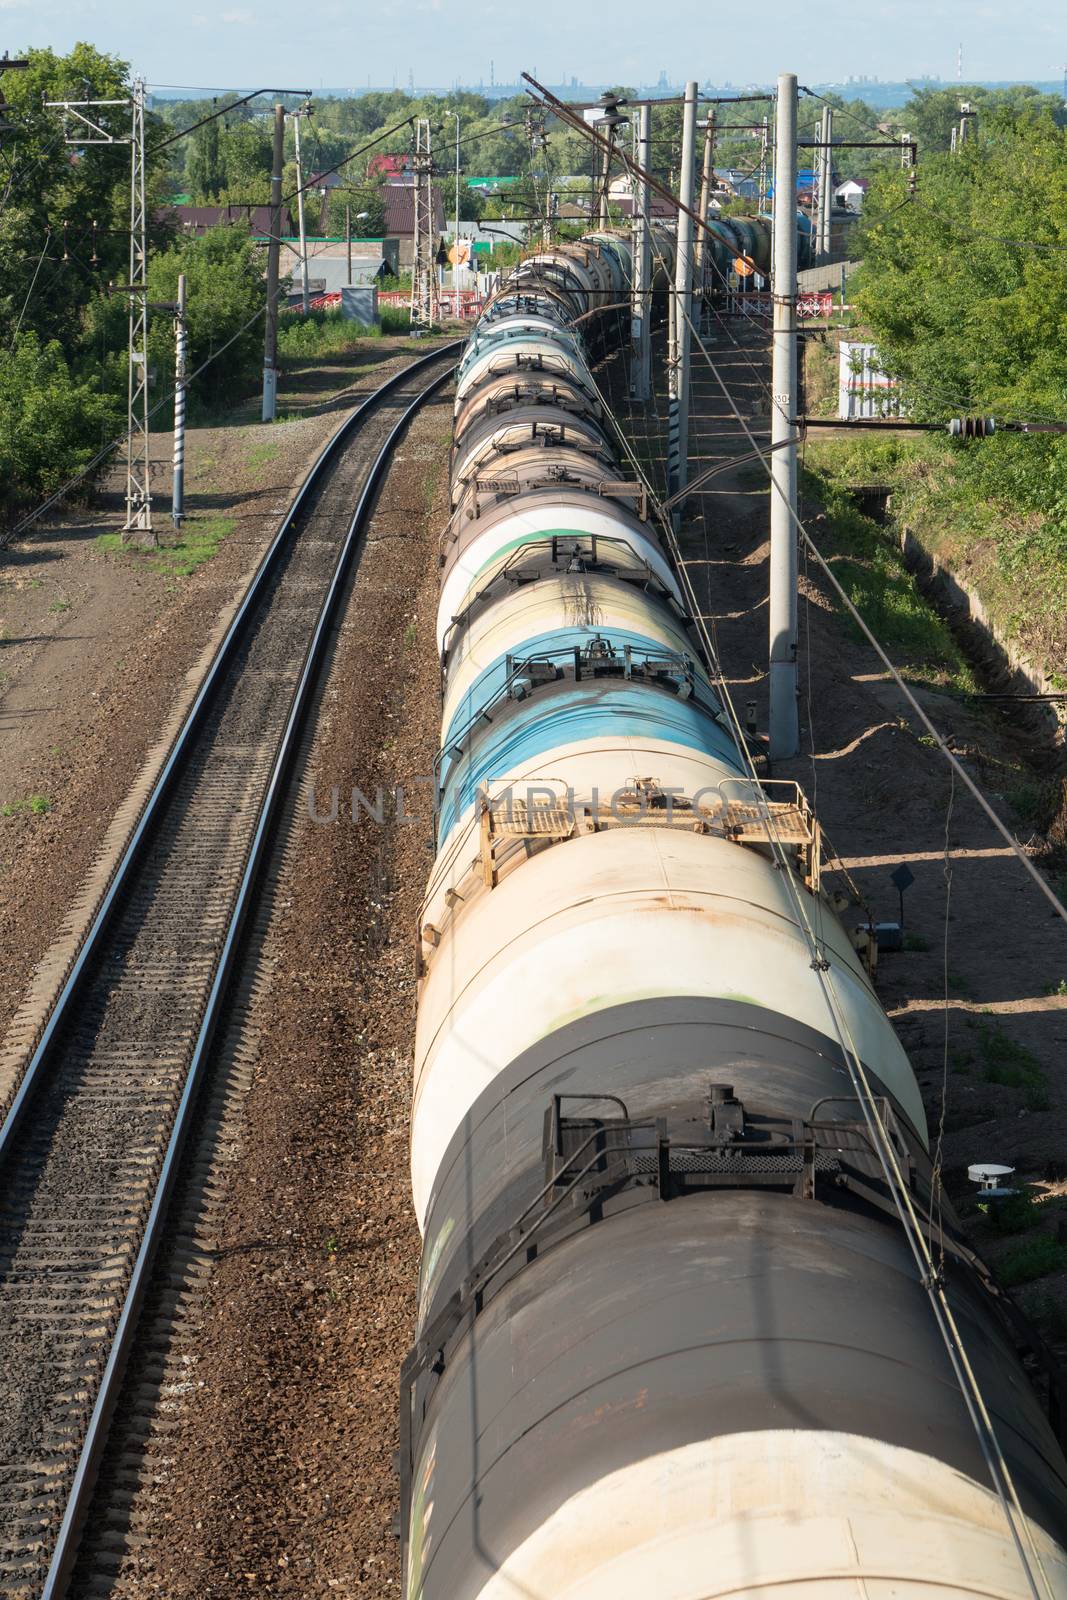 train with tank cars on the railroad tracks, top view